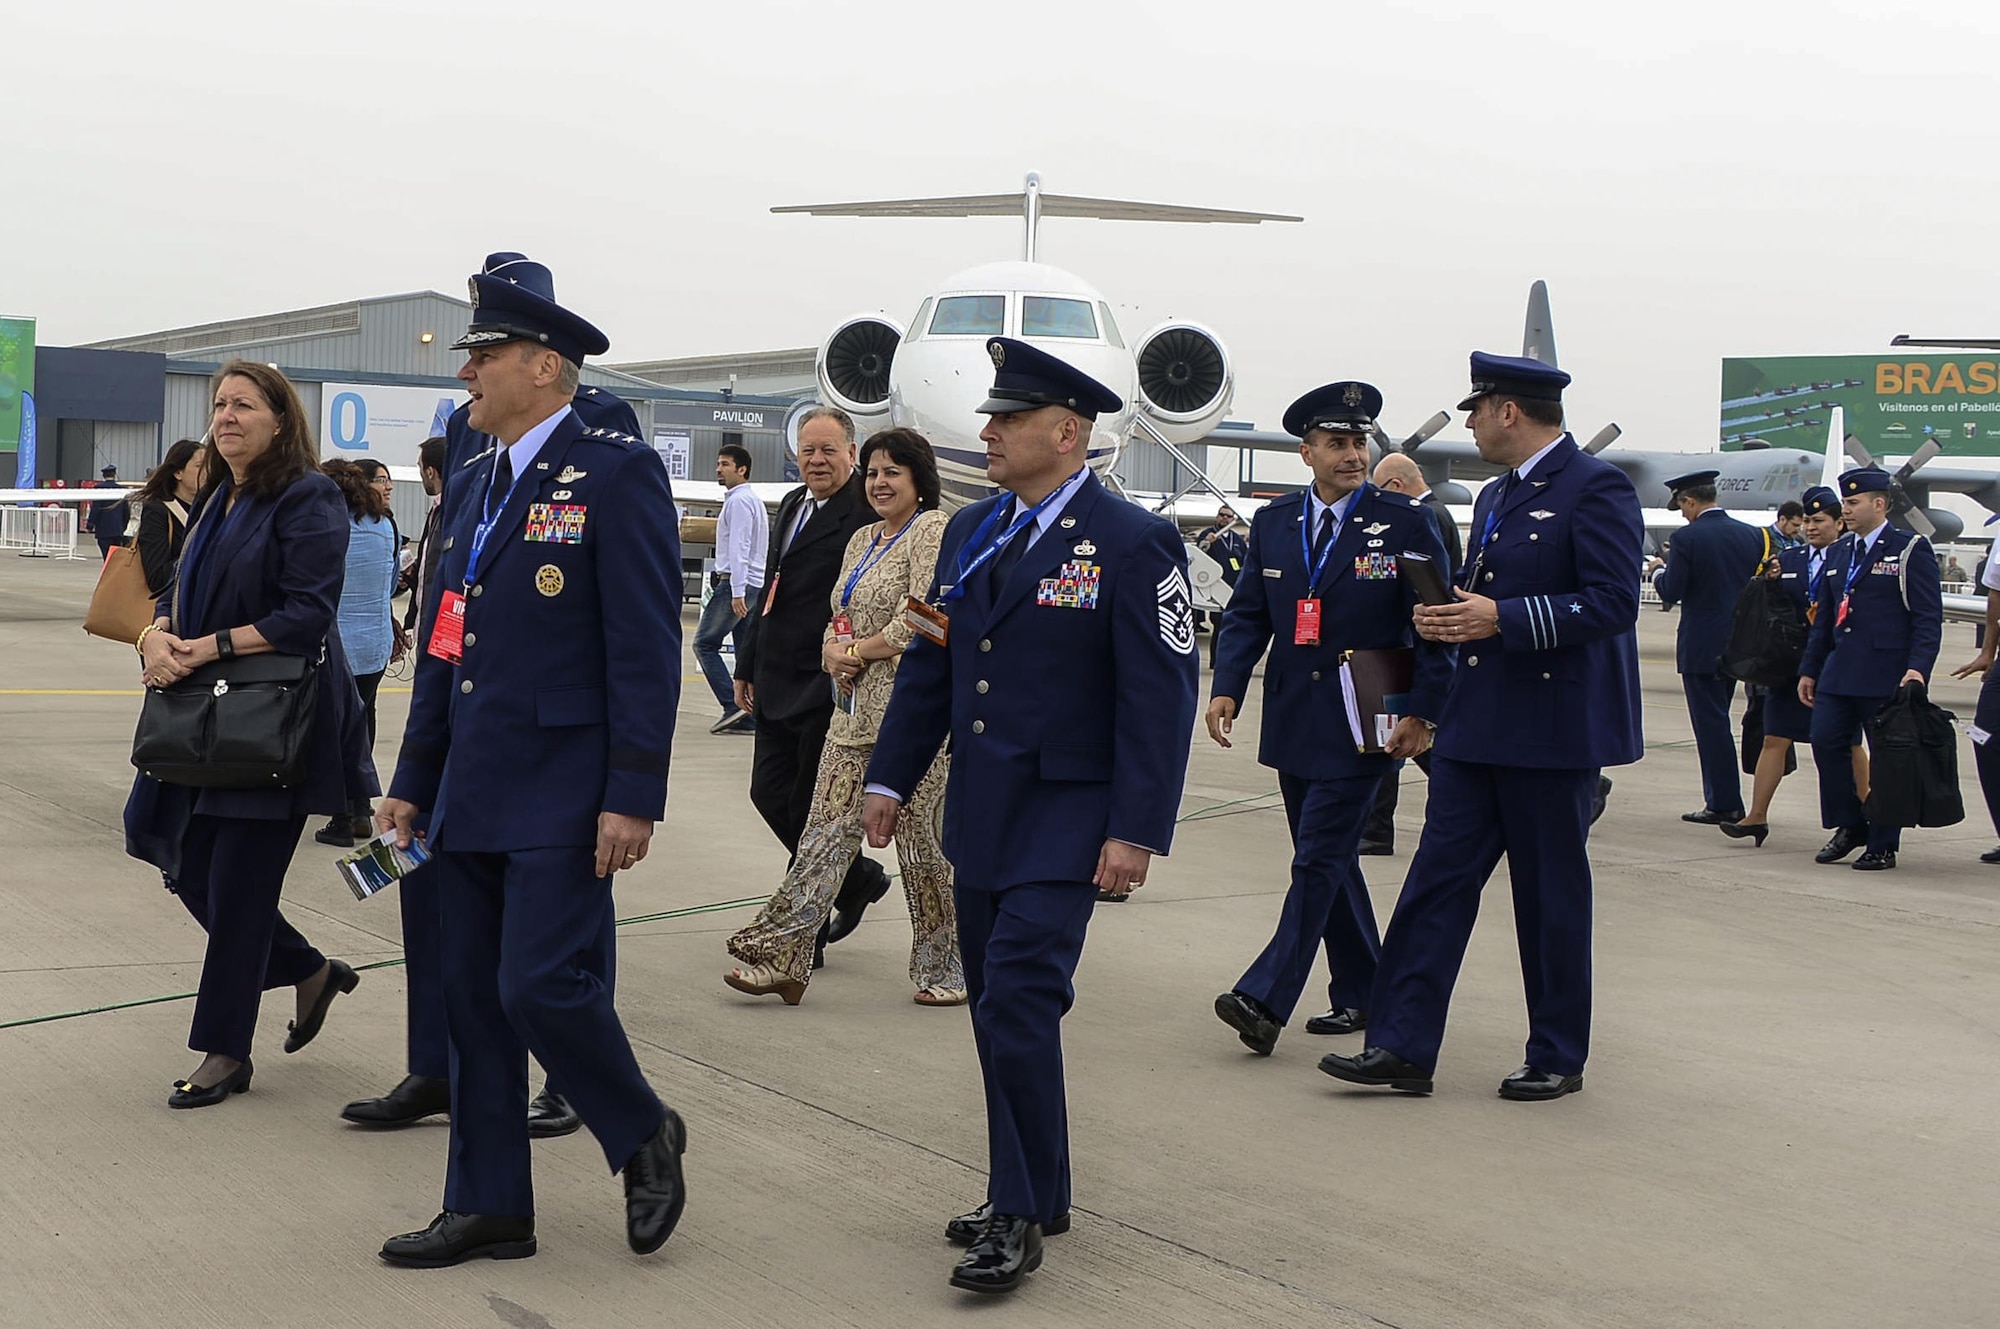 Lt. Gen. Chris Nowland, 12th Air Force (Air Forces Southern) commander, and Chief Master Sgt. Jose Barraza, 12 AF (AFSOUTH) command chief, head into the exhibition center during the opening of the 2016 International Air and Space Fair (FIDAE) in Santiago, Chile, March 29, 2016. Airmen from around the U.S. are scheduled to participate in a variety of activities during the week-long air show that includes aerial demonstrations, interaction with the local community, and subject matter expert exchanges with the Chilean air force. (U.S. Air Force photo by Tech. Sgt. Heather Redman/Released)